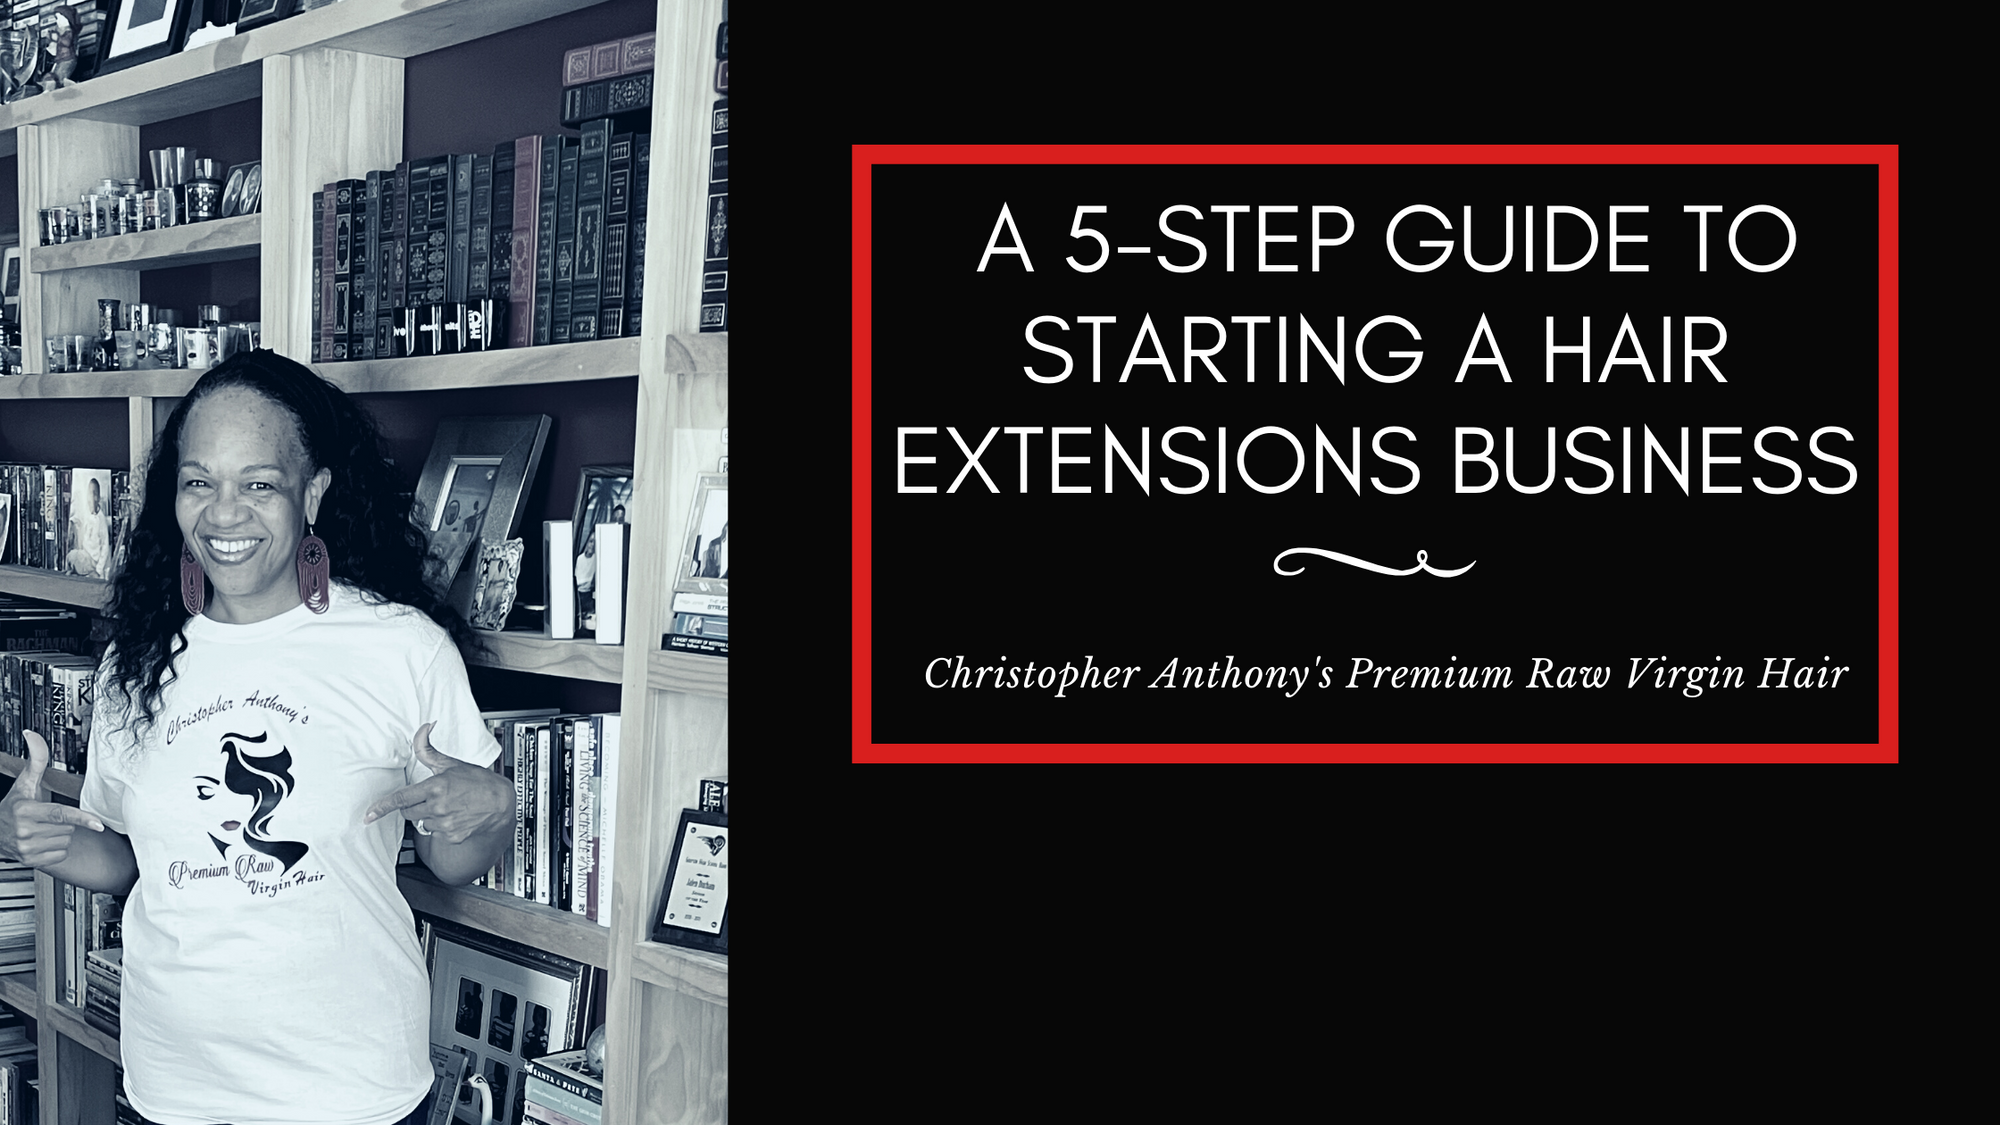 A 5-Step Guide to Starting a Hair Extensions Business